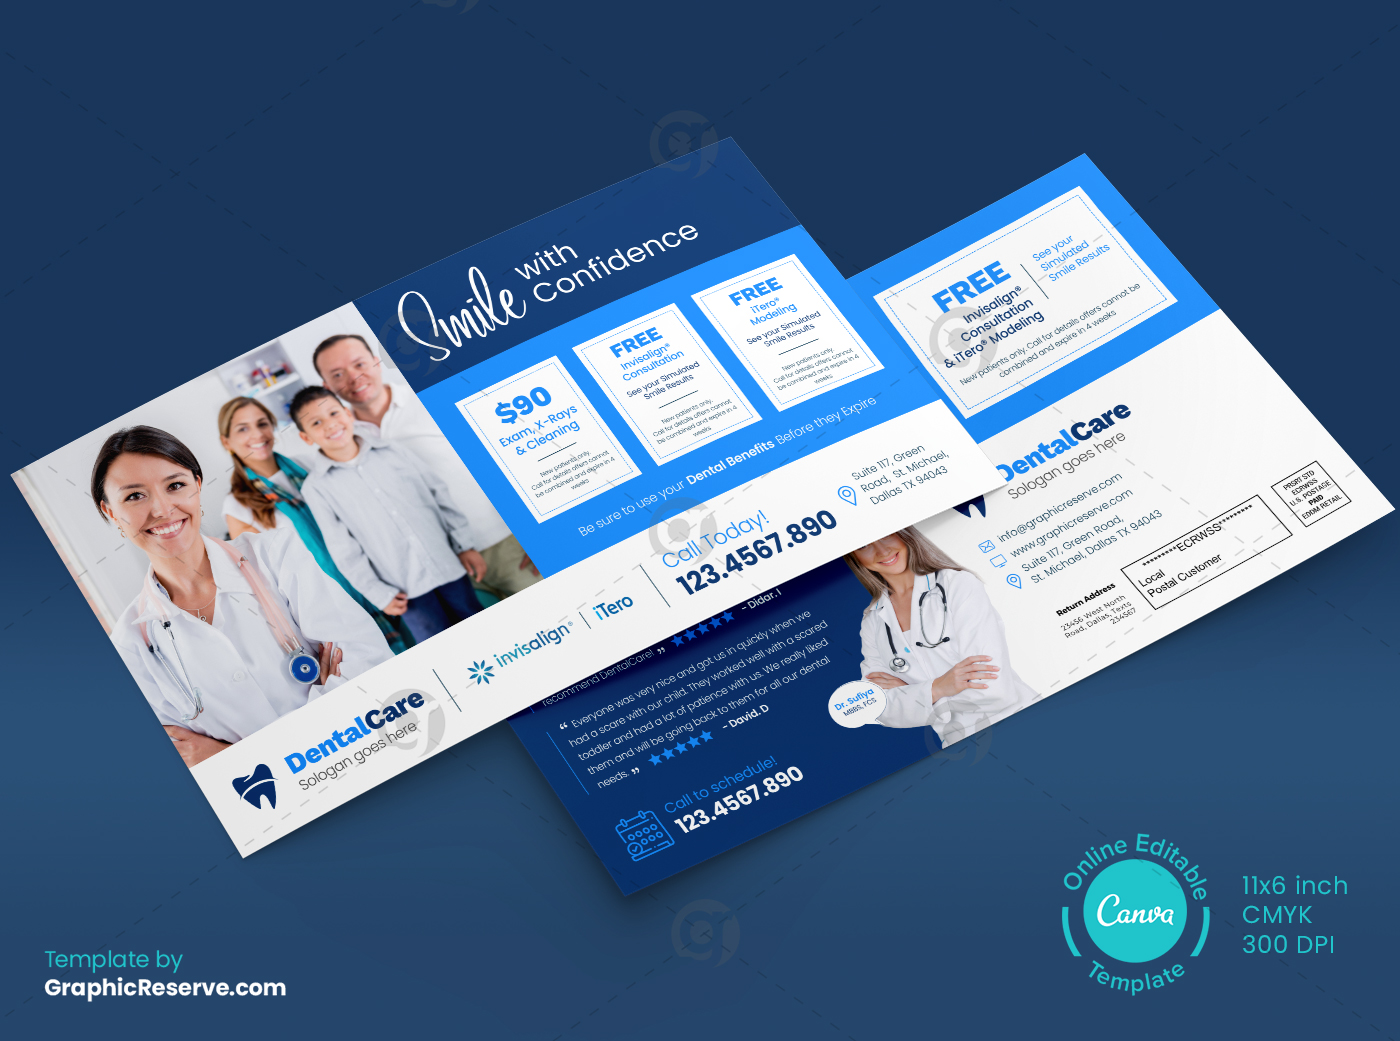 Dentist Awesome Marketing Postcard Example with 3 coupon Code